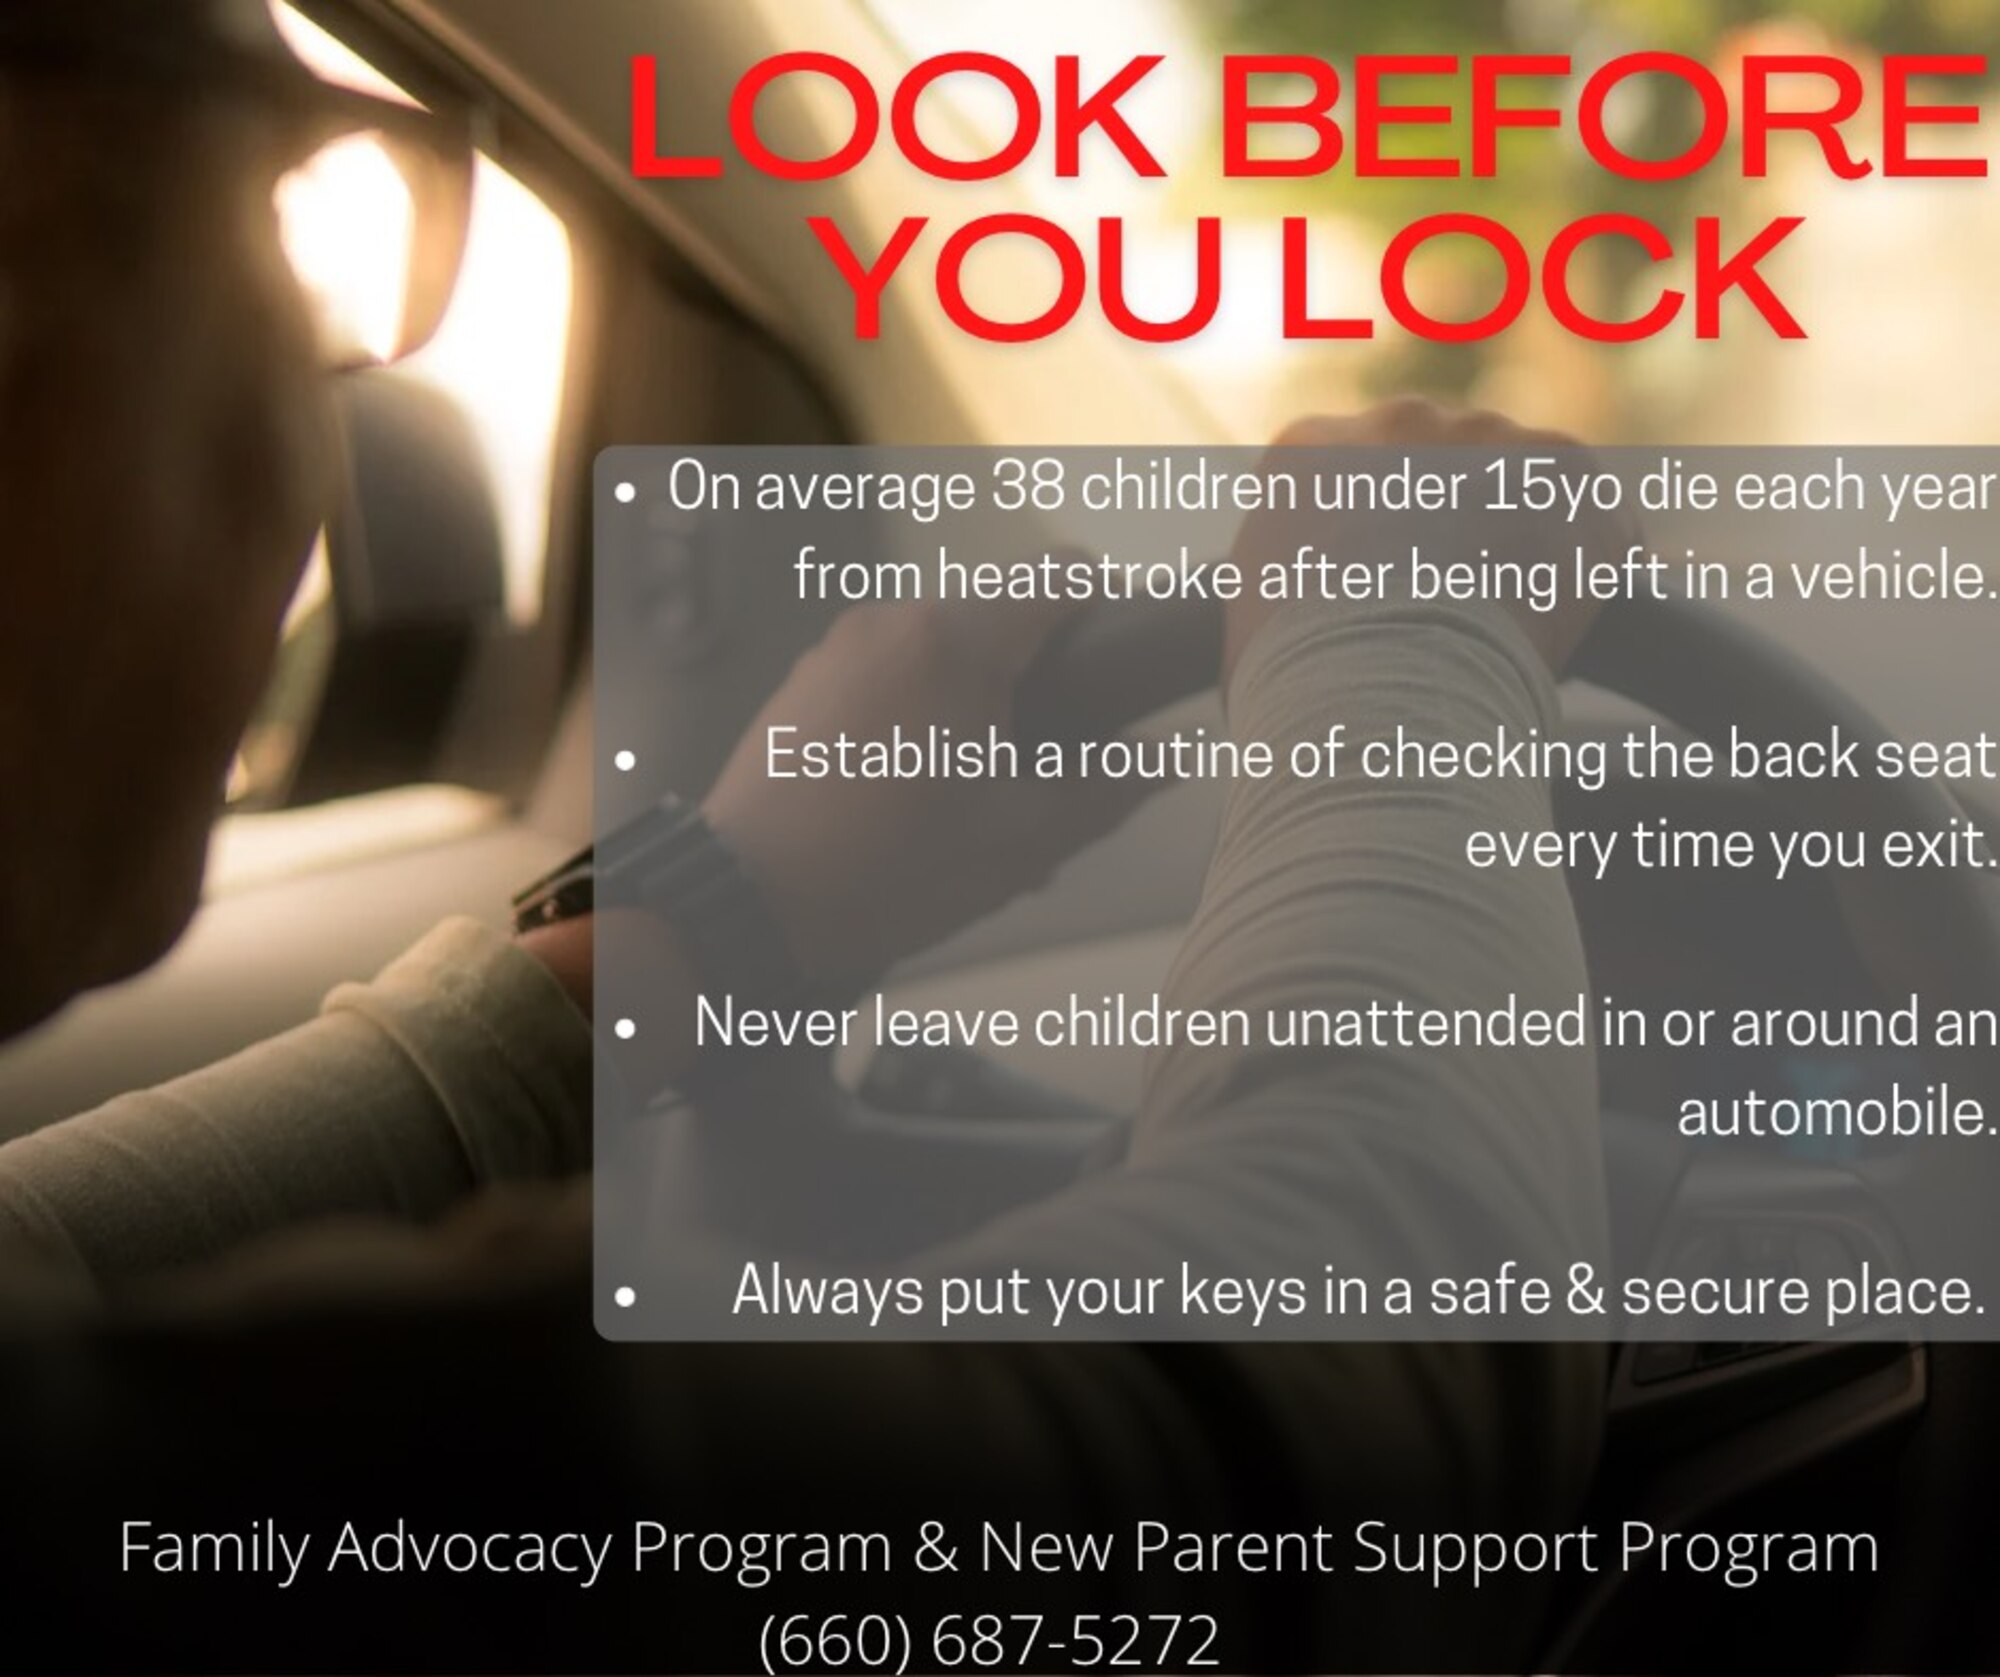 A graphic about looking in the back seat before locking the car.